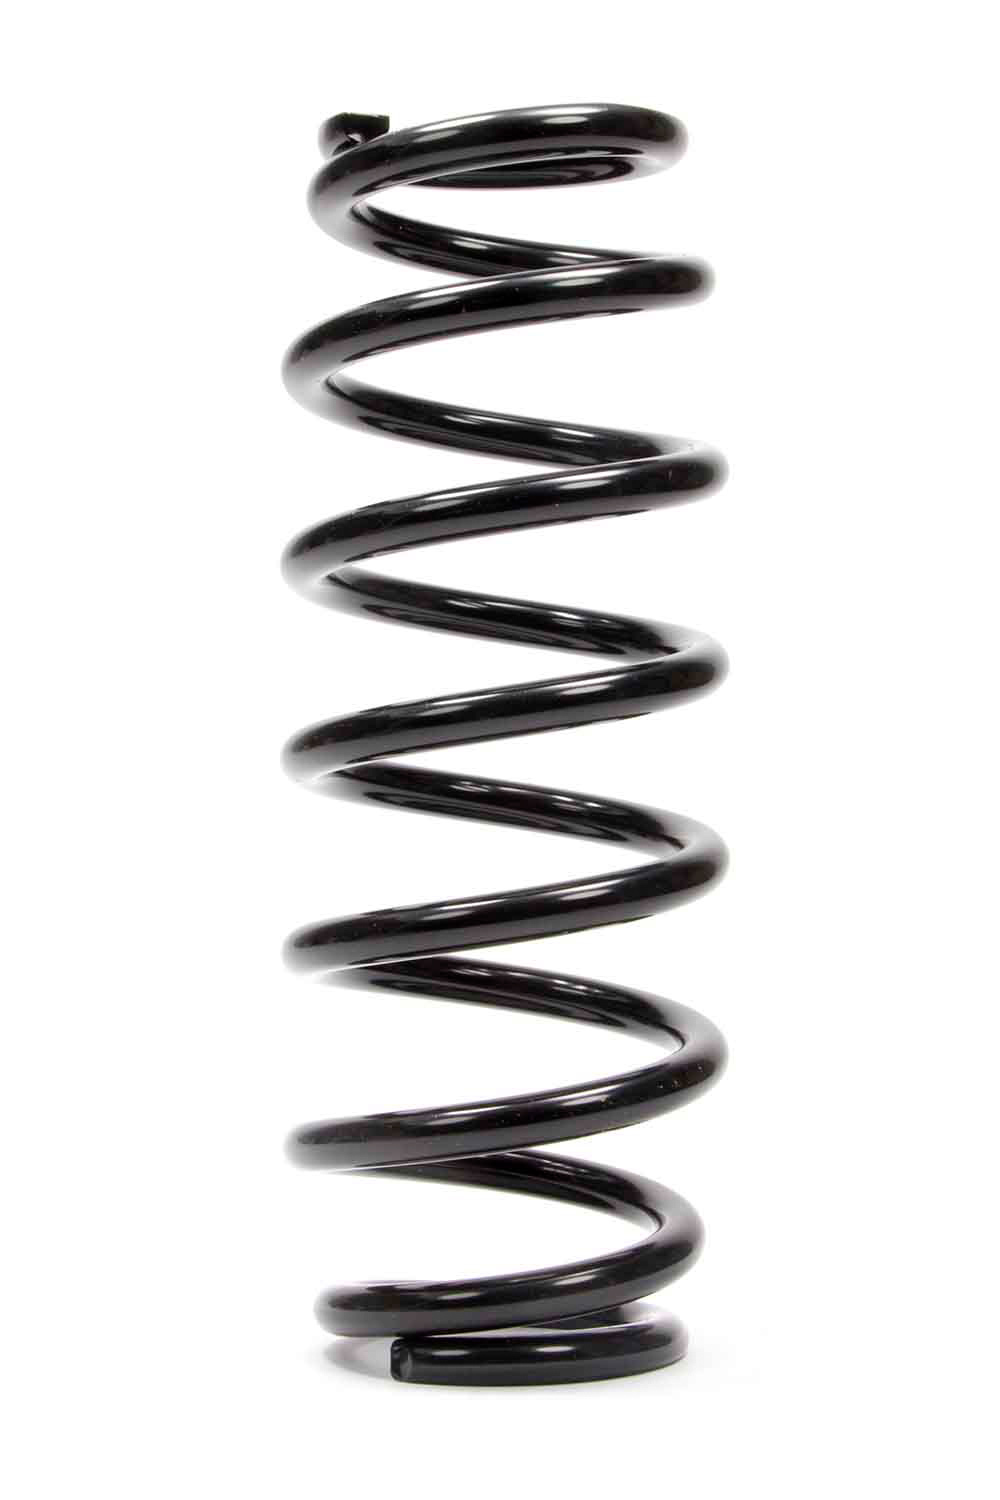 Integra Shocks 310-2512-225DLC Coil Spring, DLC Series, Coil-Over, 2.625 in ID, 12.000 in Length, 225 lb/in Spring Rate, Steel, Black Powder Coat, Each